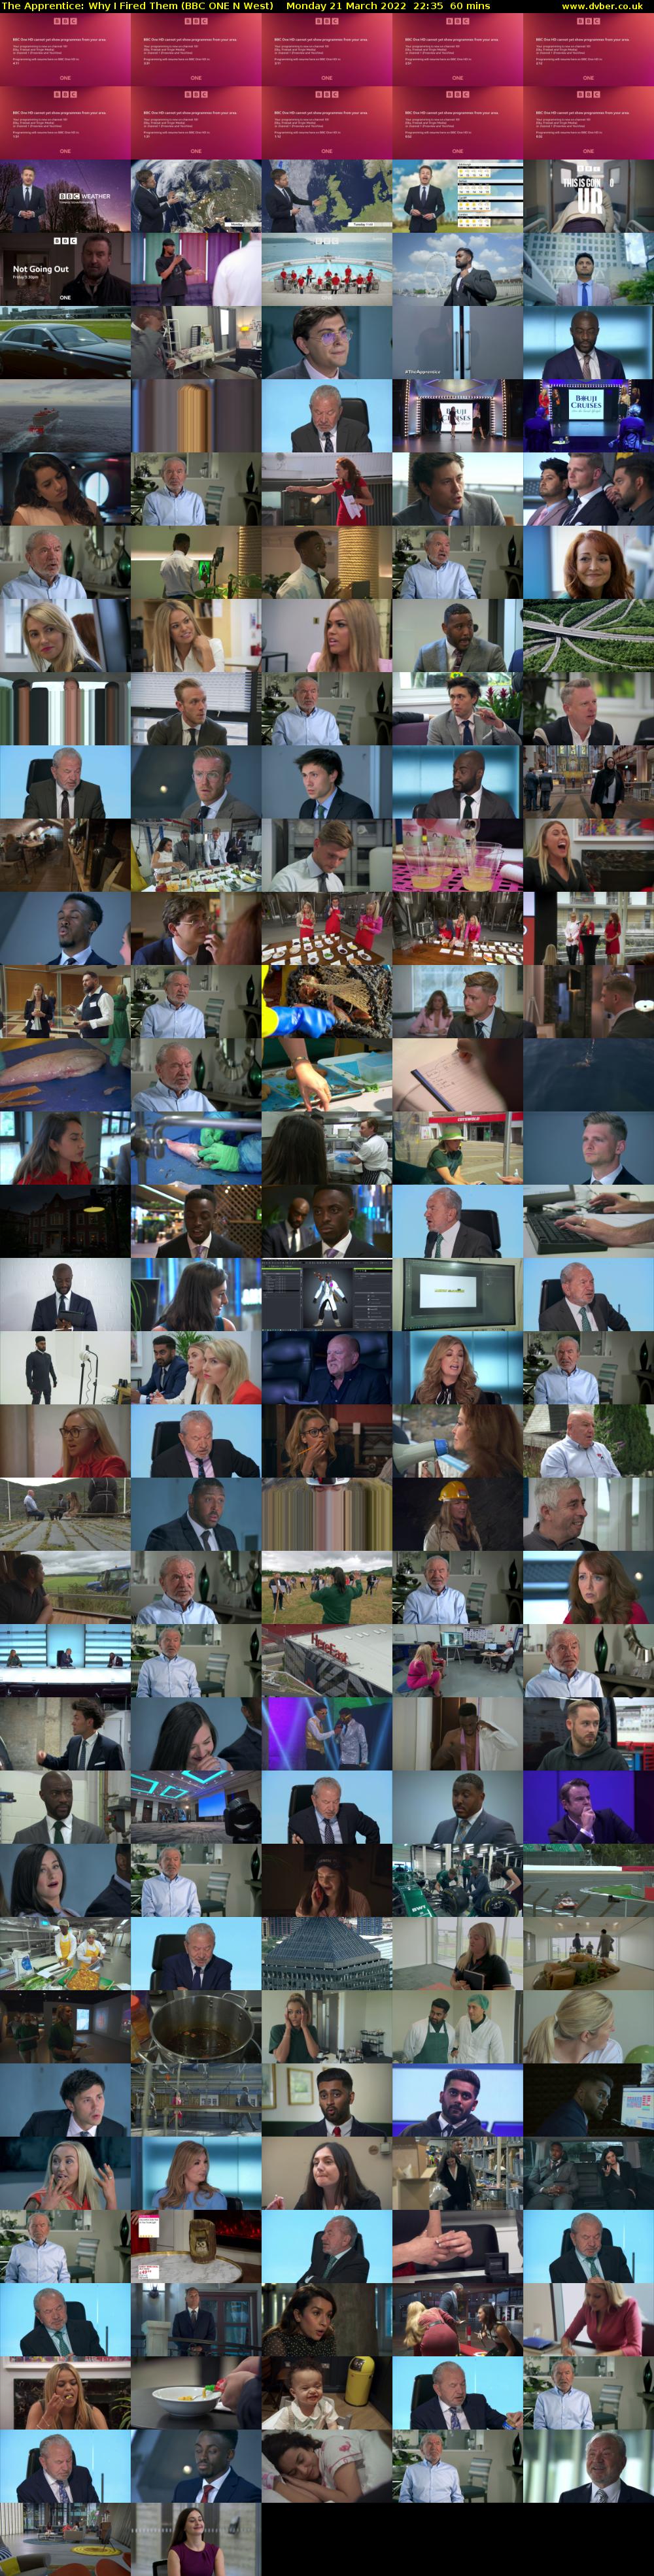 The Apprentice: Why I Fired Them (BBC ONE N West) Monday 21 March 2022 22:35 - 23:35